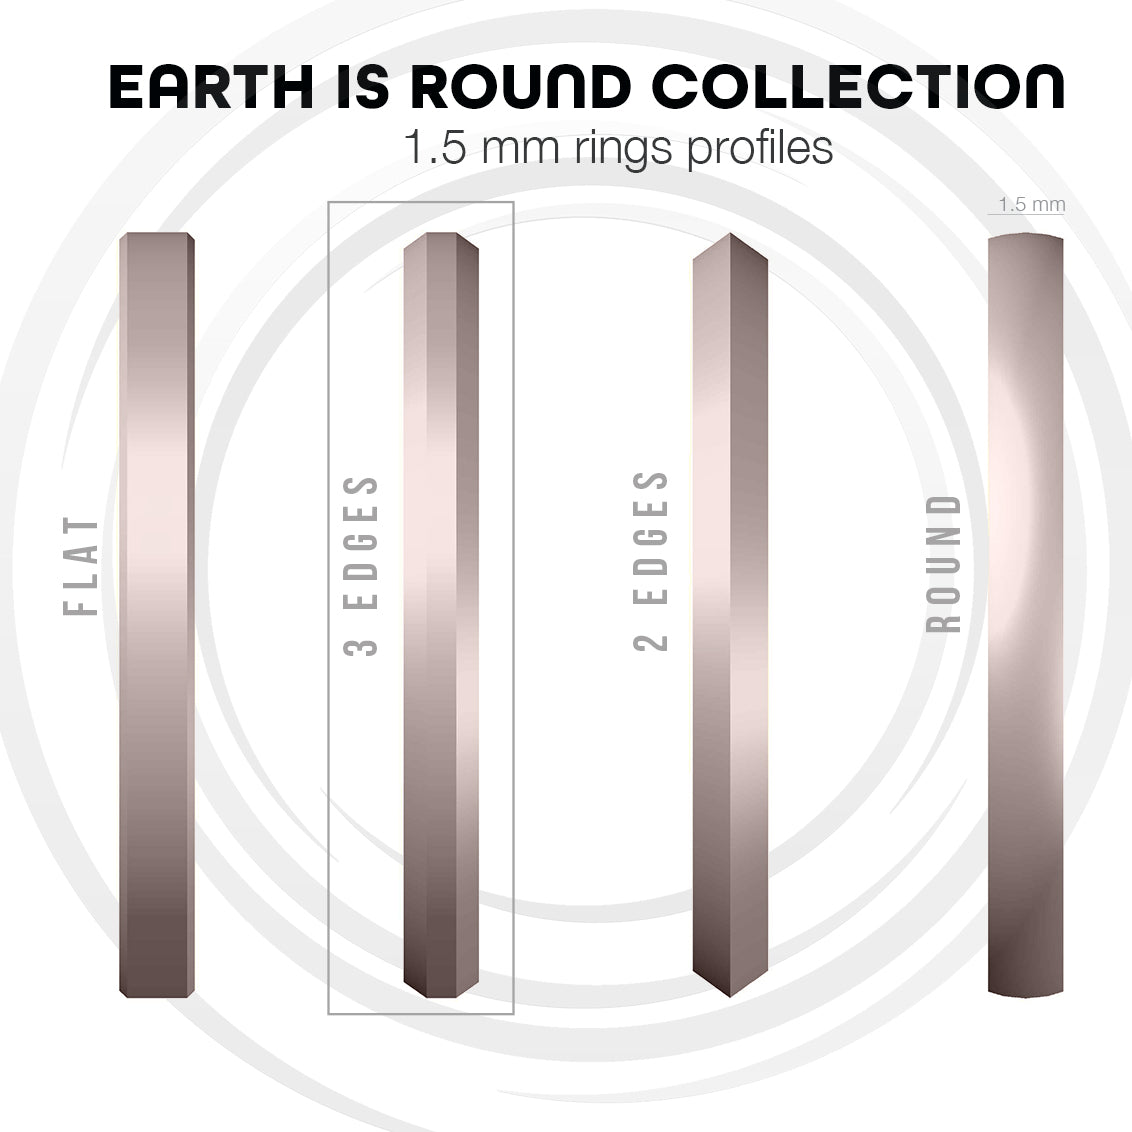 Bague EARTH IS ROUND 1.5mm profil trois bords Platine 600